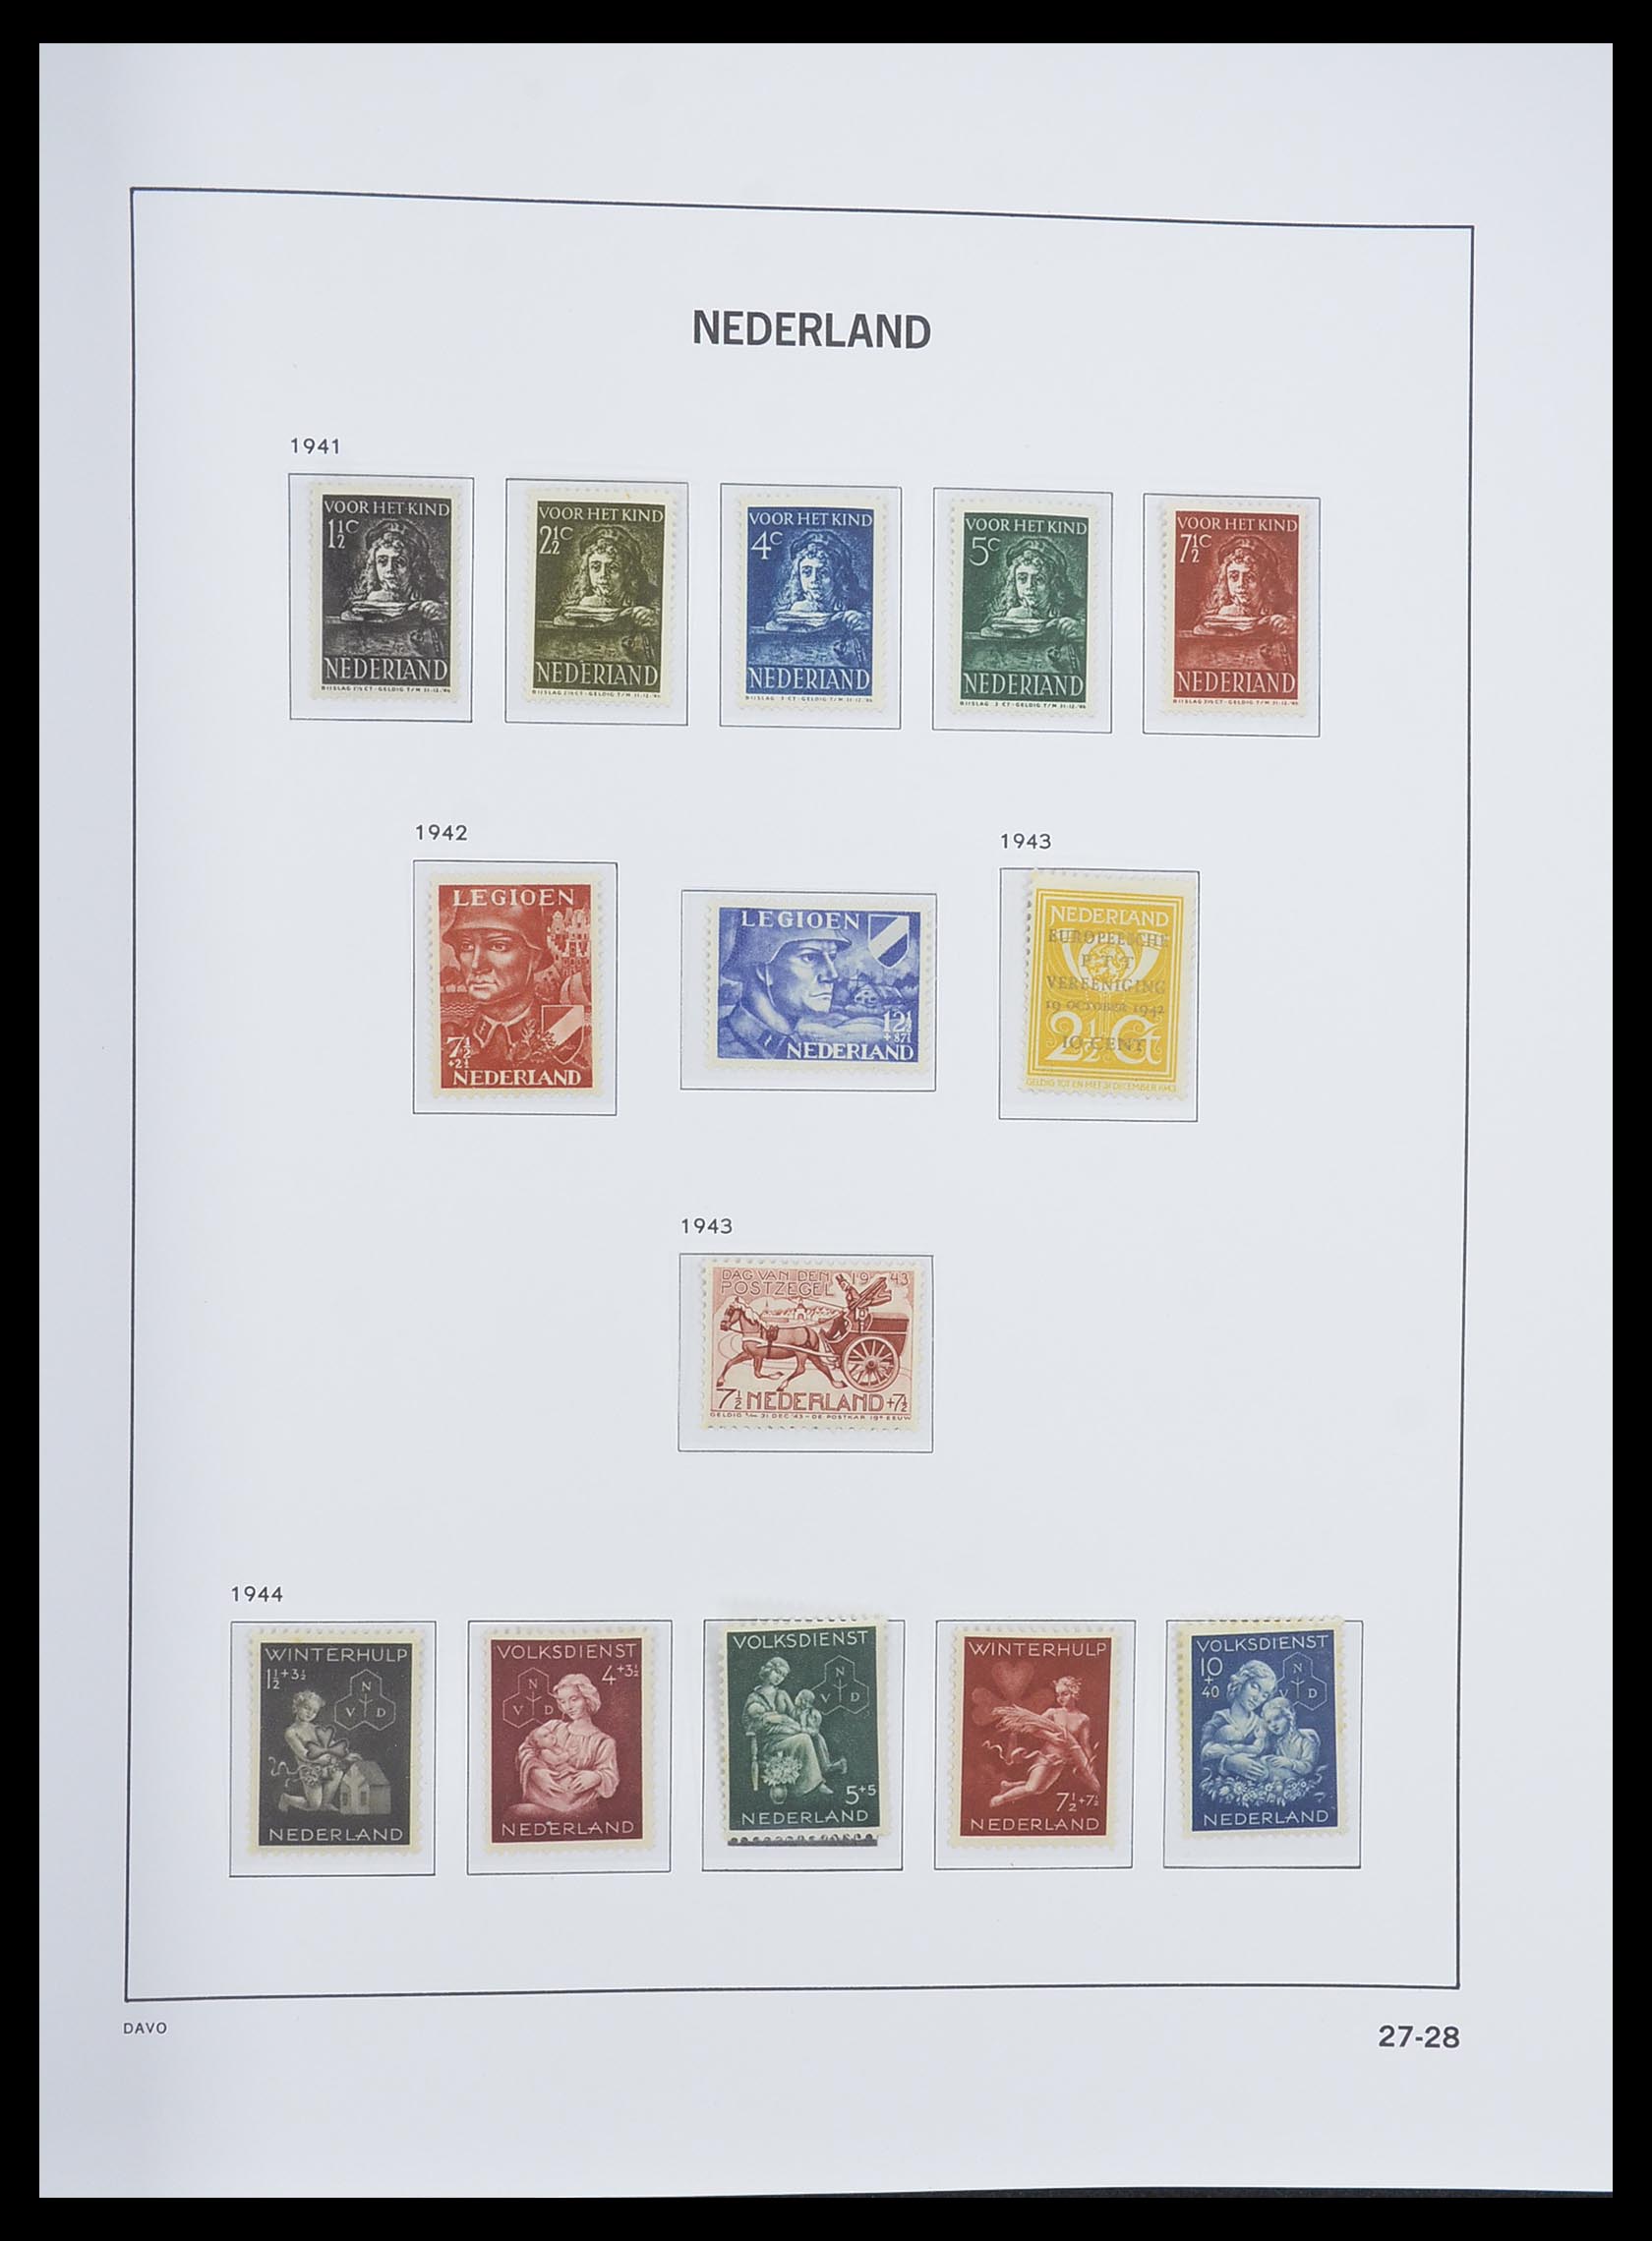 33338 025 - Stamp collection 33338 Netherlands 1876-1969.